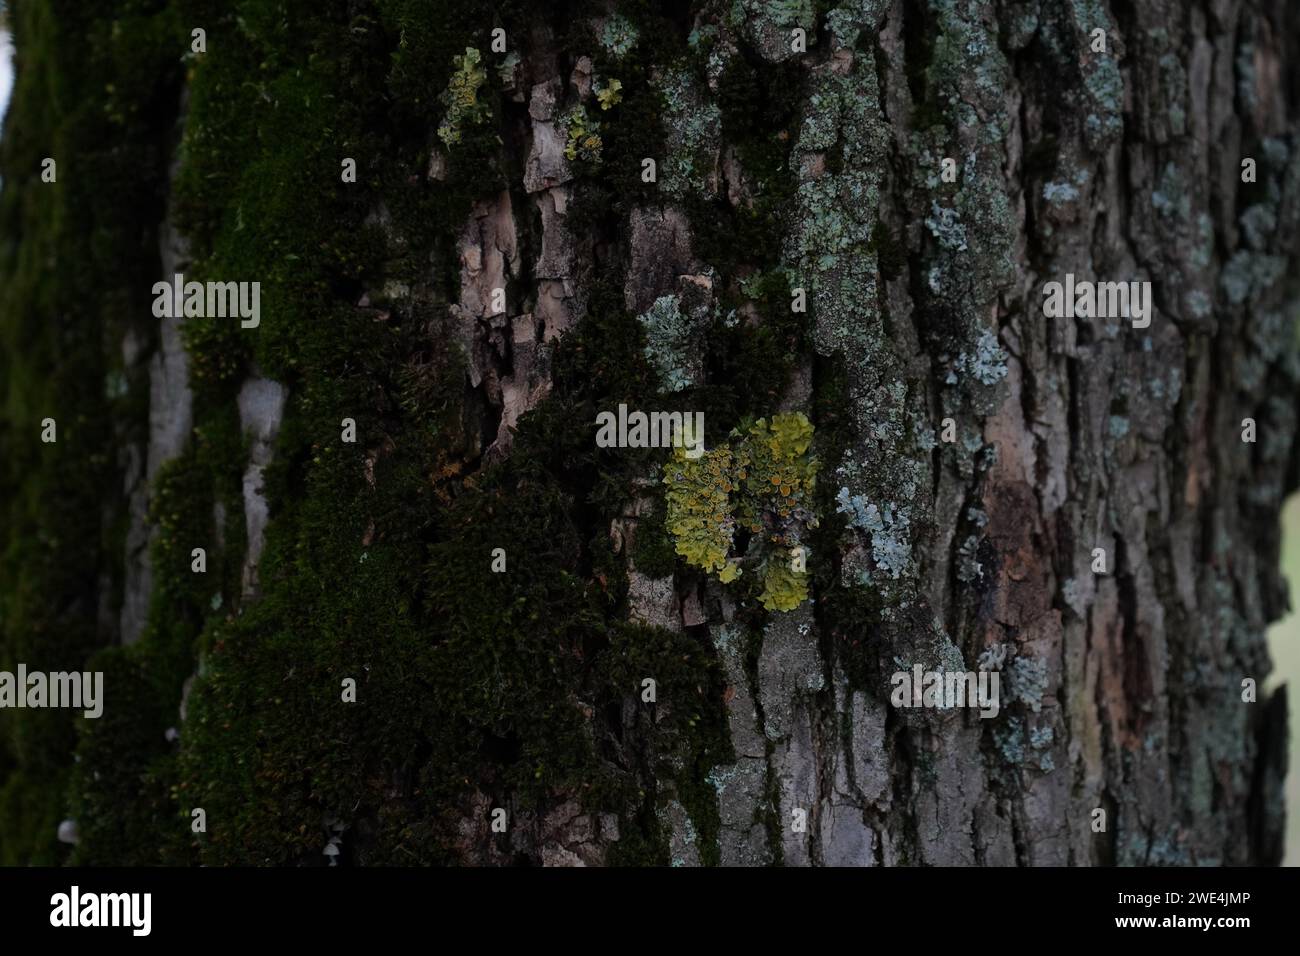 Moss on tree known as green ash or red ash(Fraxinus pennsylvanica) Stock Photo